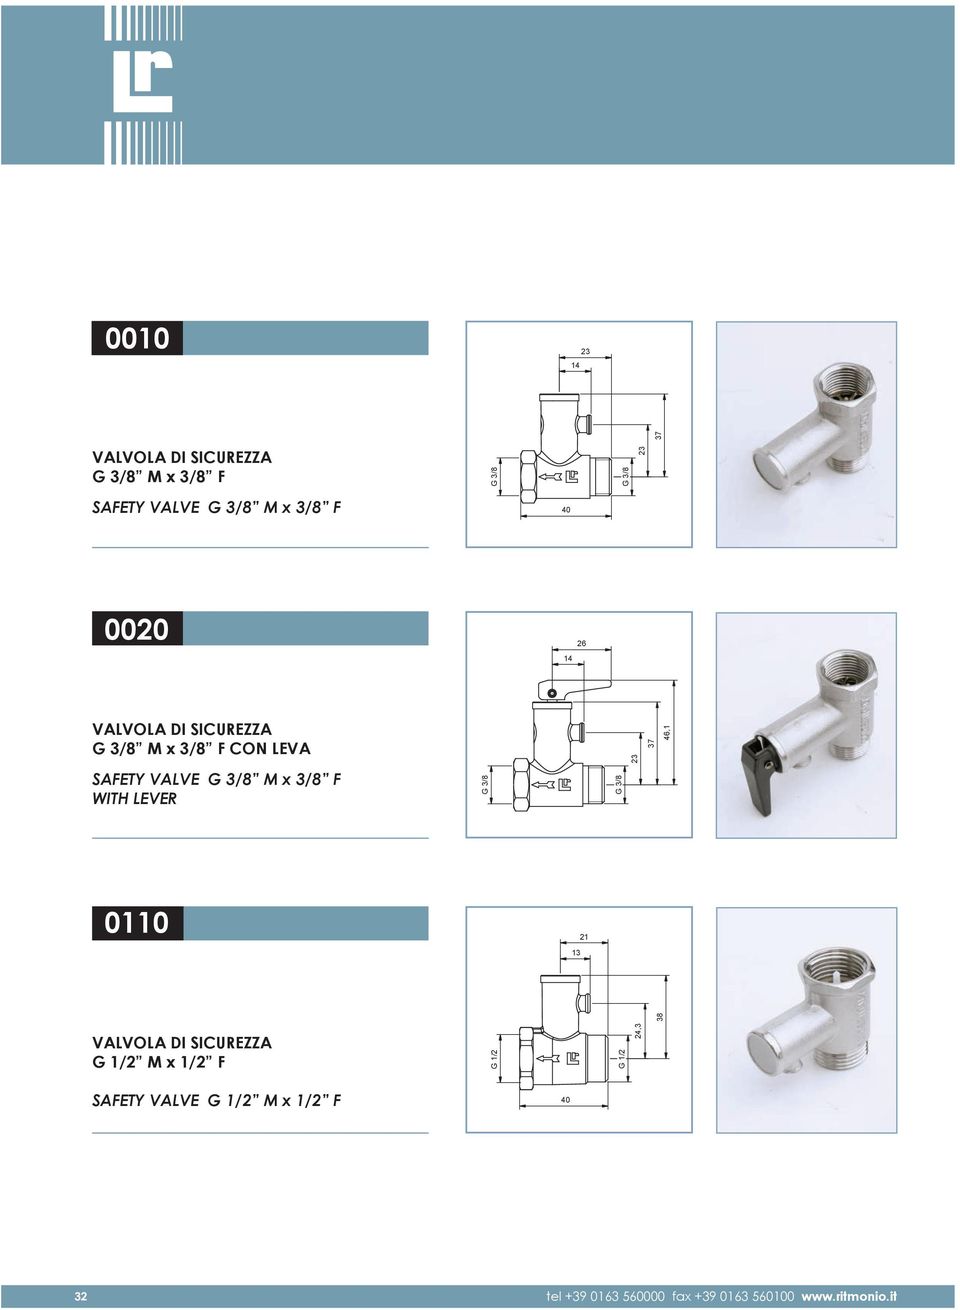 46,1 SAFETY VALVE G 3/8 M x 3/8 F WITH LEVER G 3/8 G 3/8